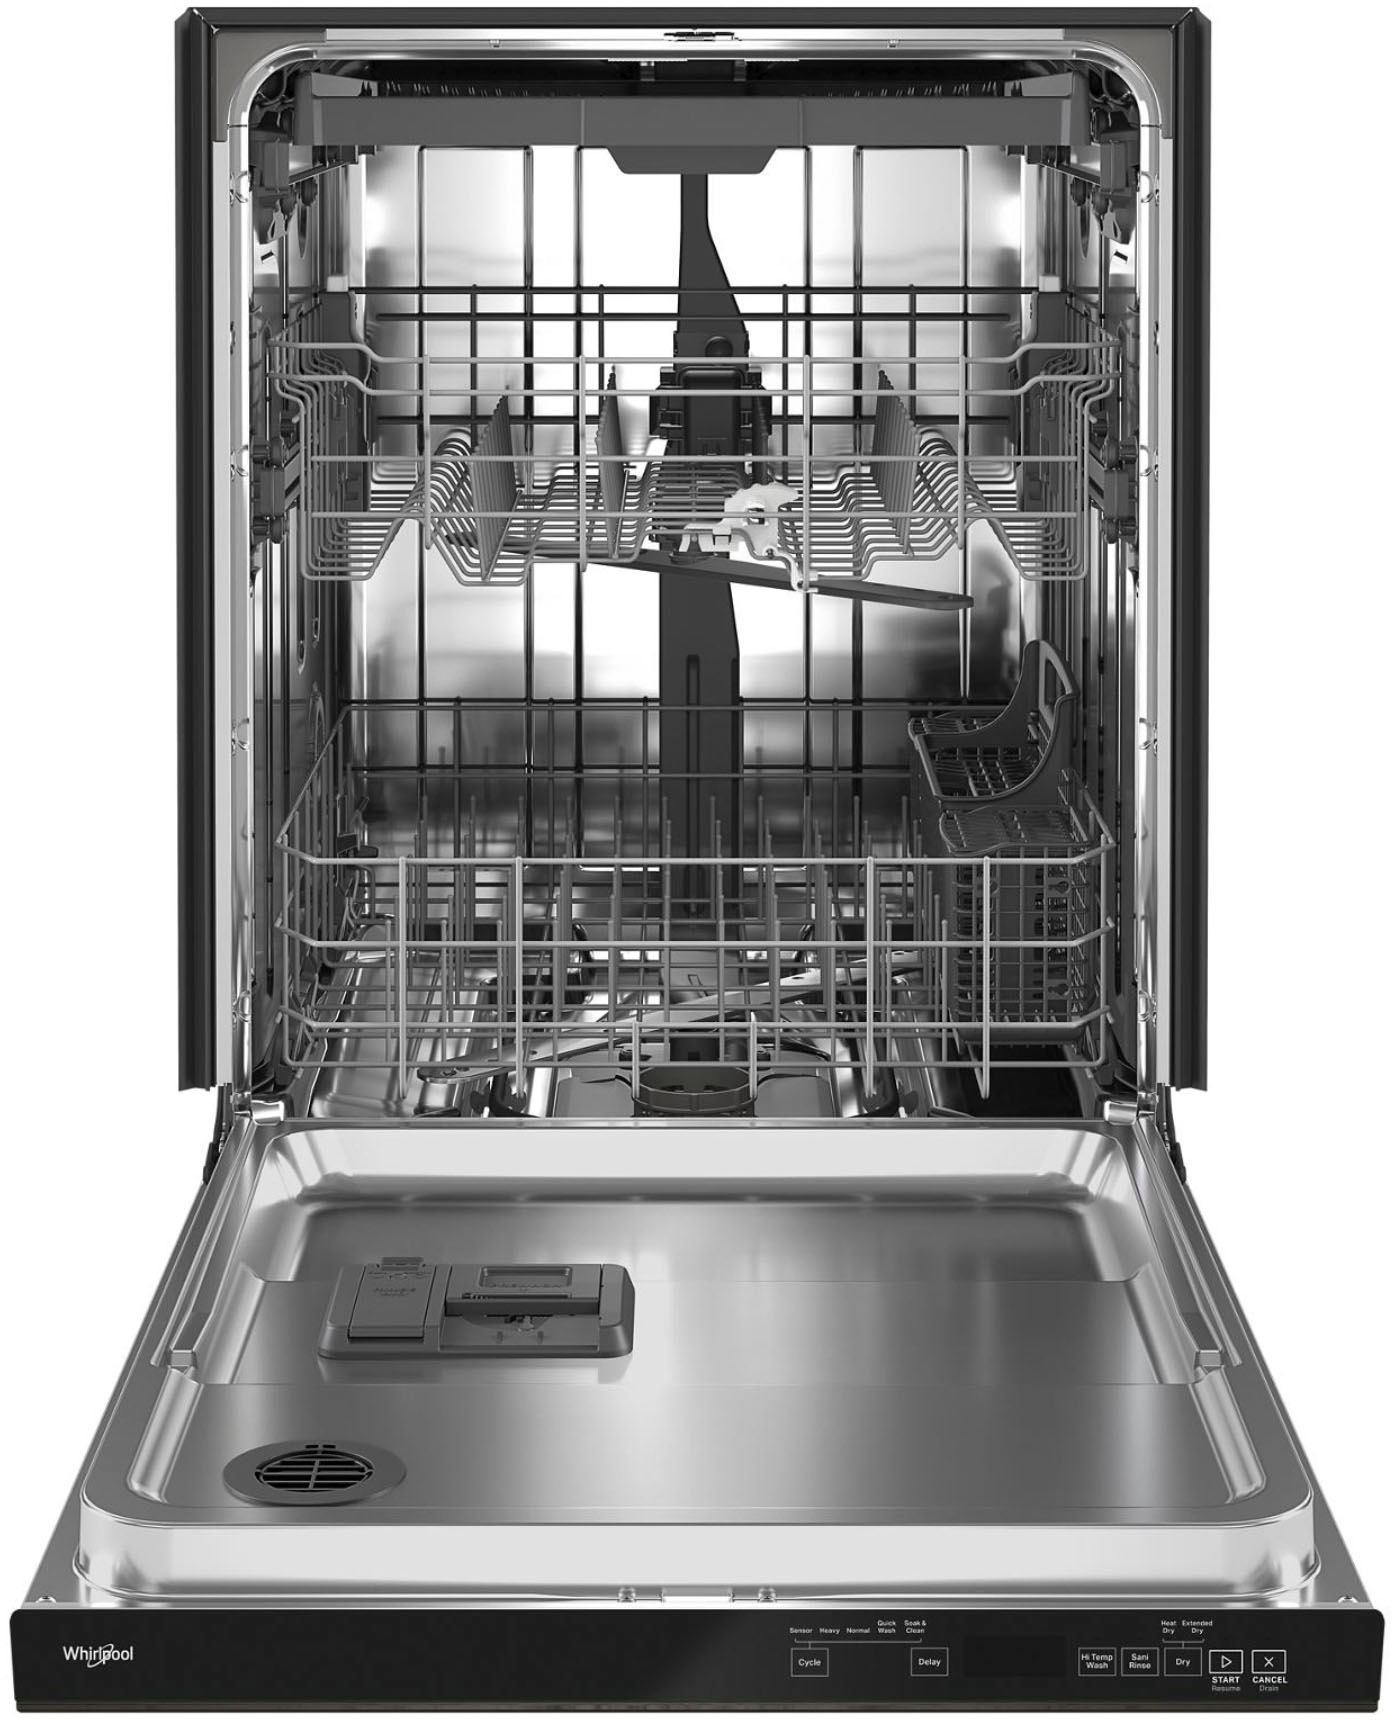 Angle View: Whirlpool WDTA50SAKZ Large Capacity Dishwasher with 3rd Rack - Stainless Steel